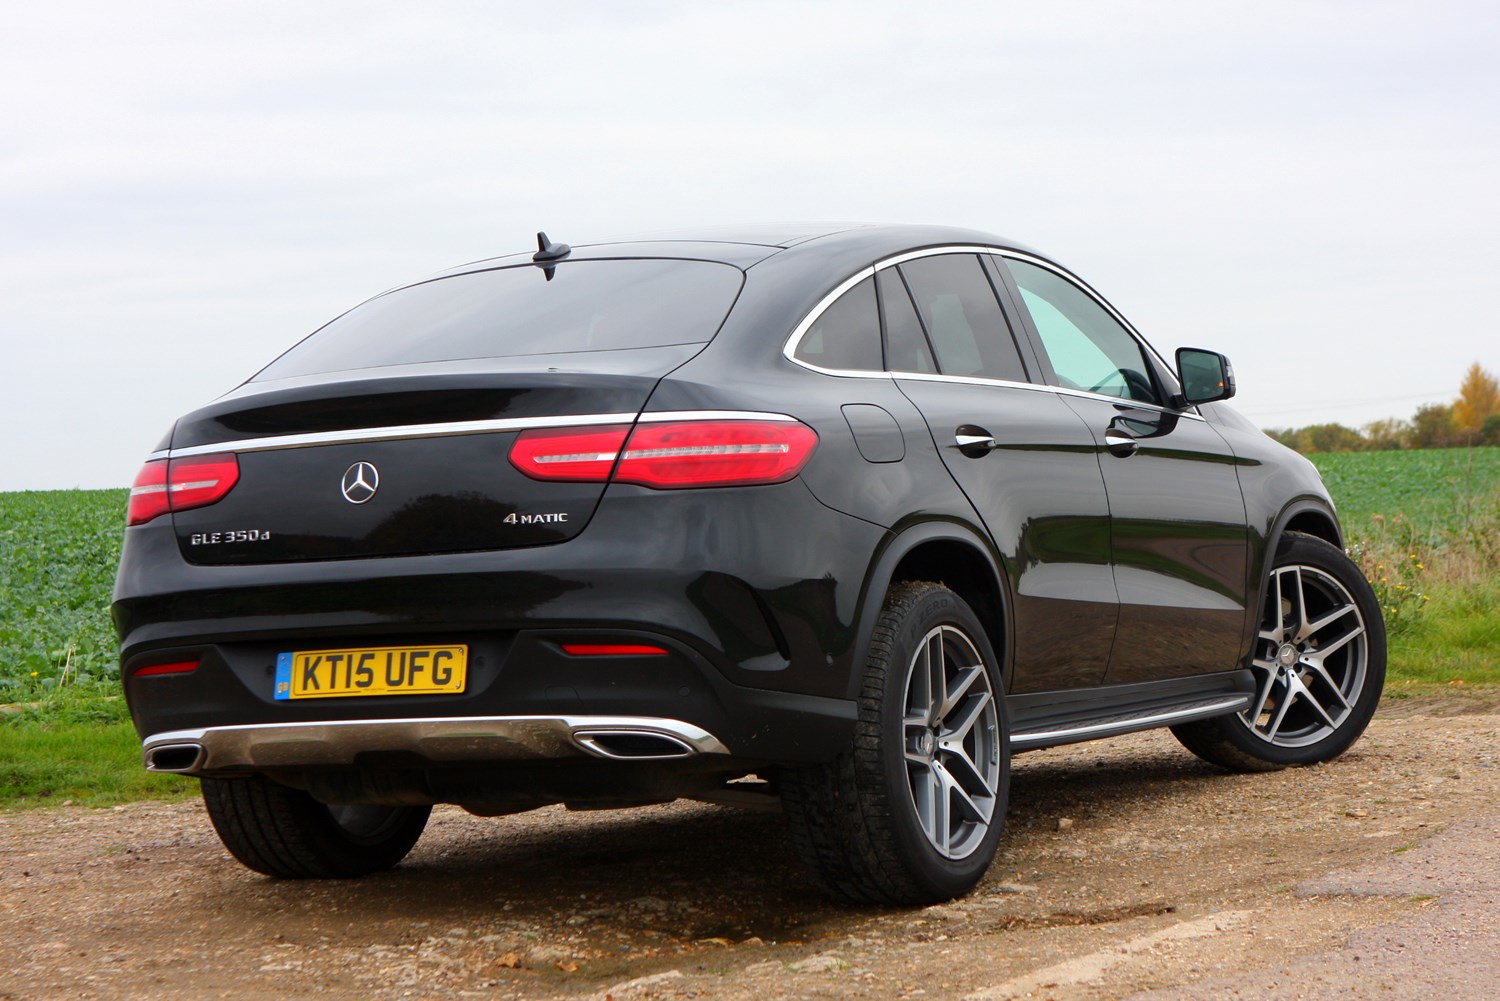 Used Mercedes-Benz GLE-Class Coupe (2015 - 2019) Review ...